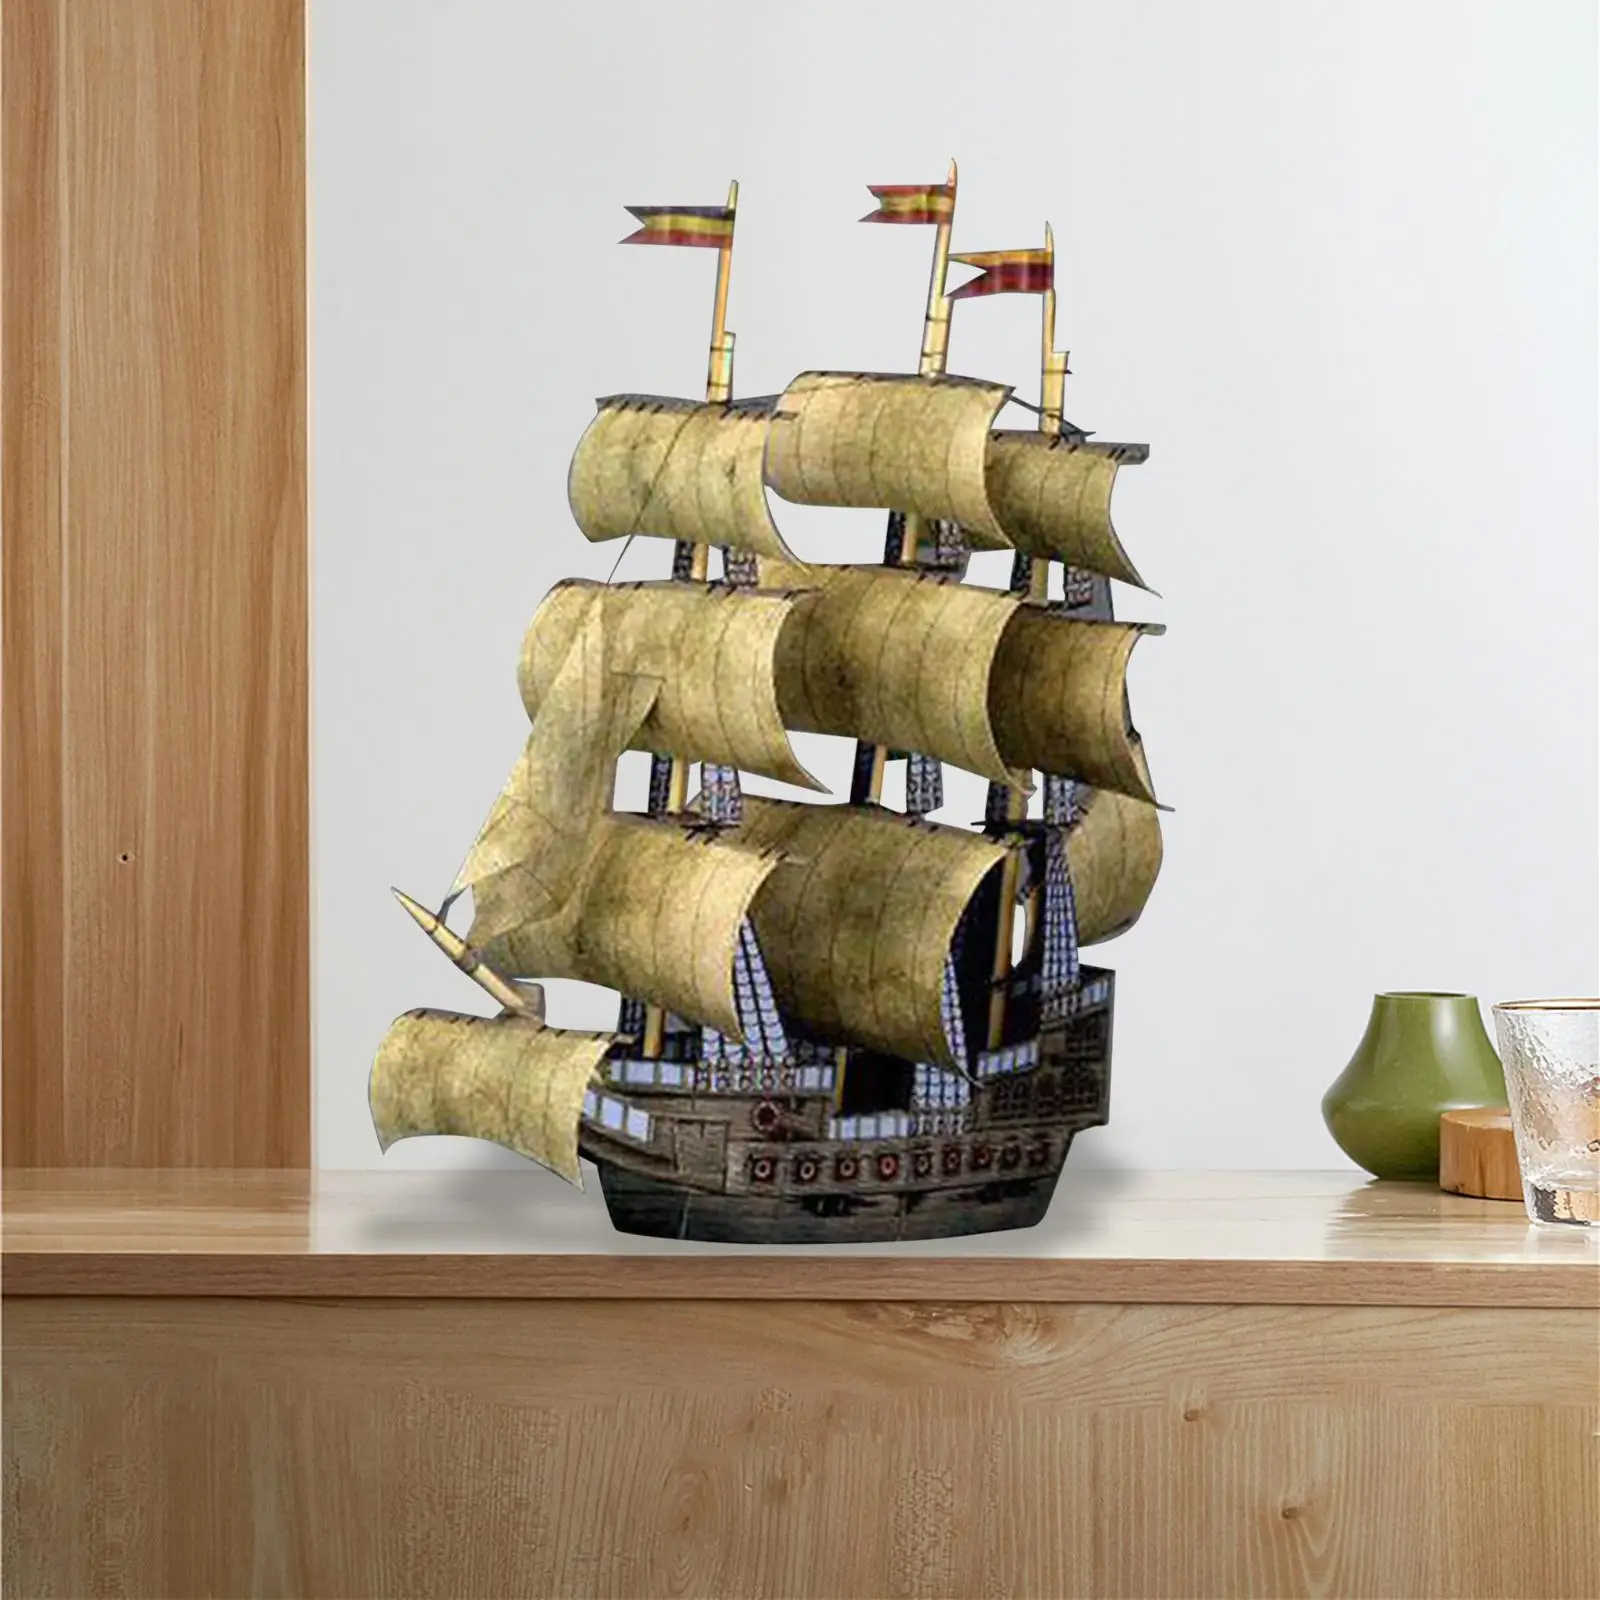 Pirate Ship Arts Crafts Gifts Sailing Boats Scale Model for Kids Adults